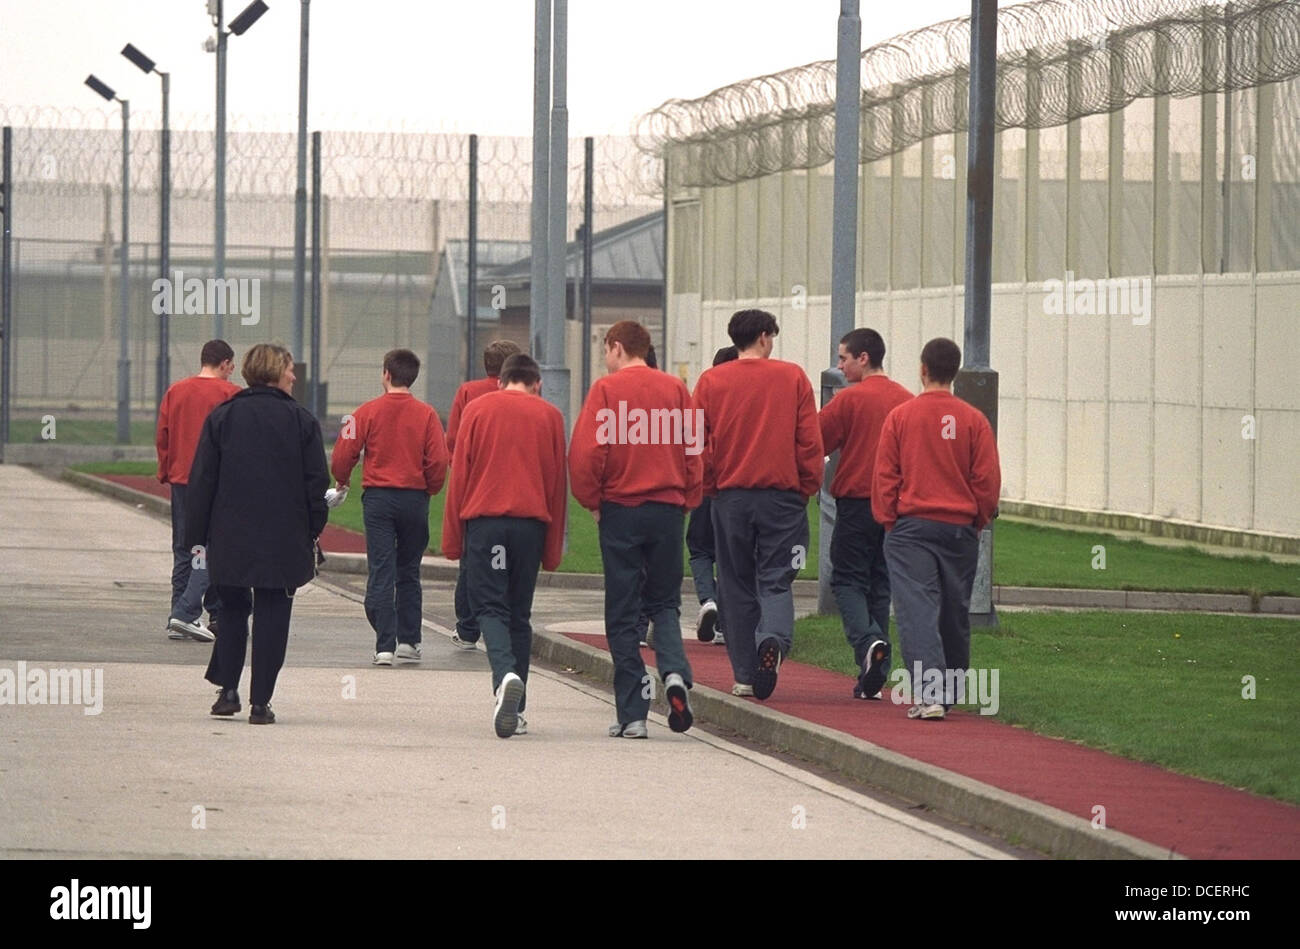 Juvenile Young Offenders Section, HM Prison Lancaster Farms male Young Offenders Institution, on the outskirts of Lancaster, UK Stock Photo